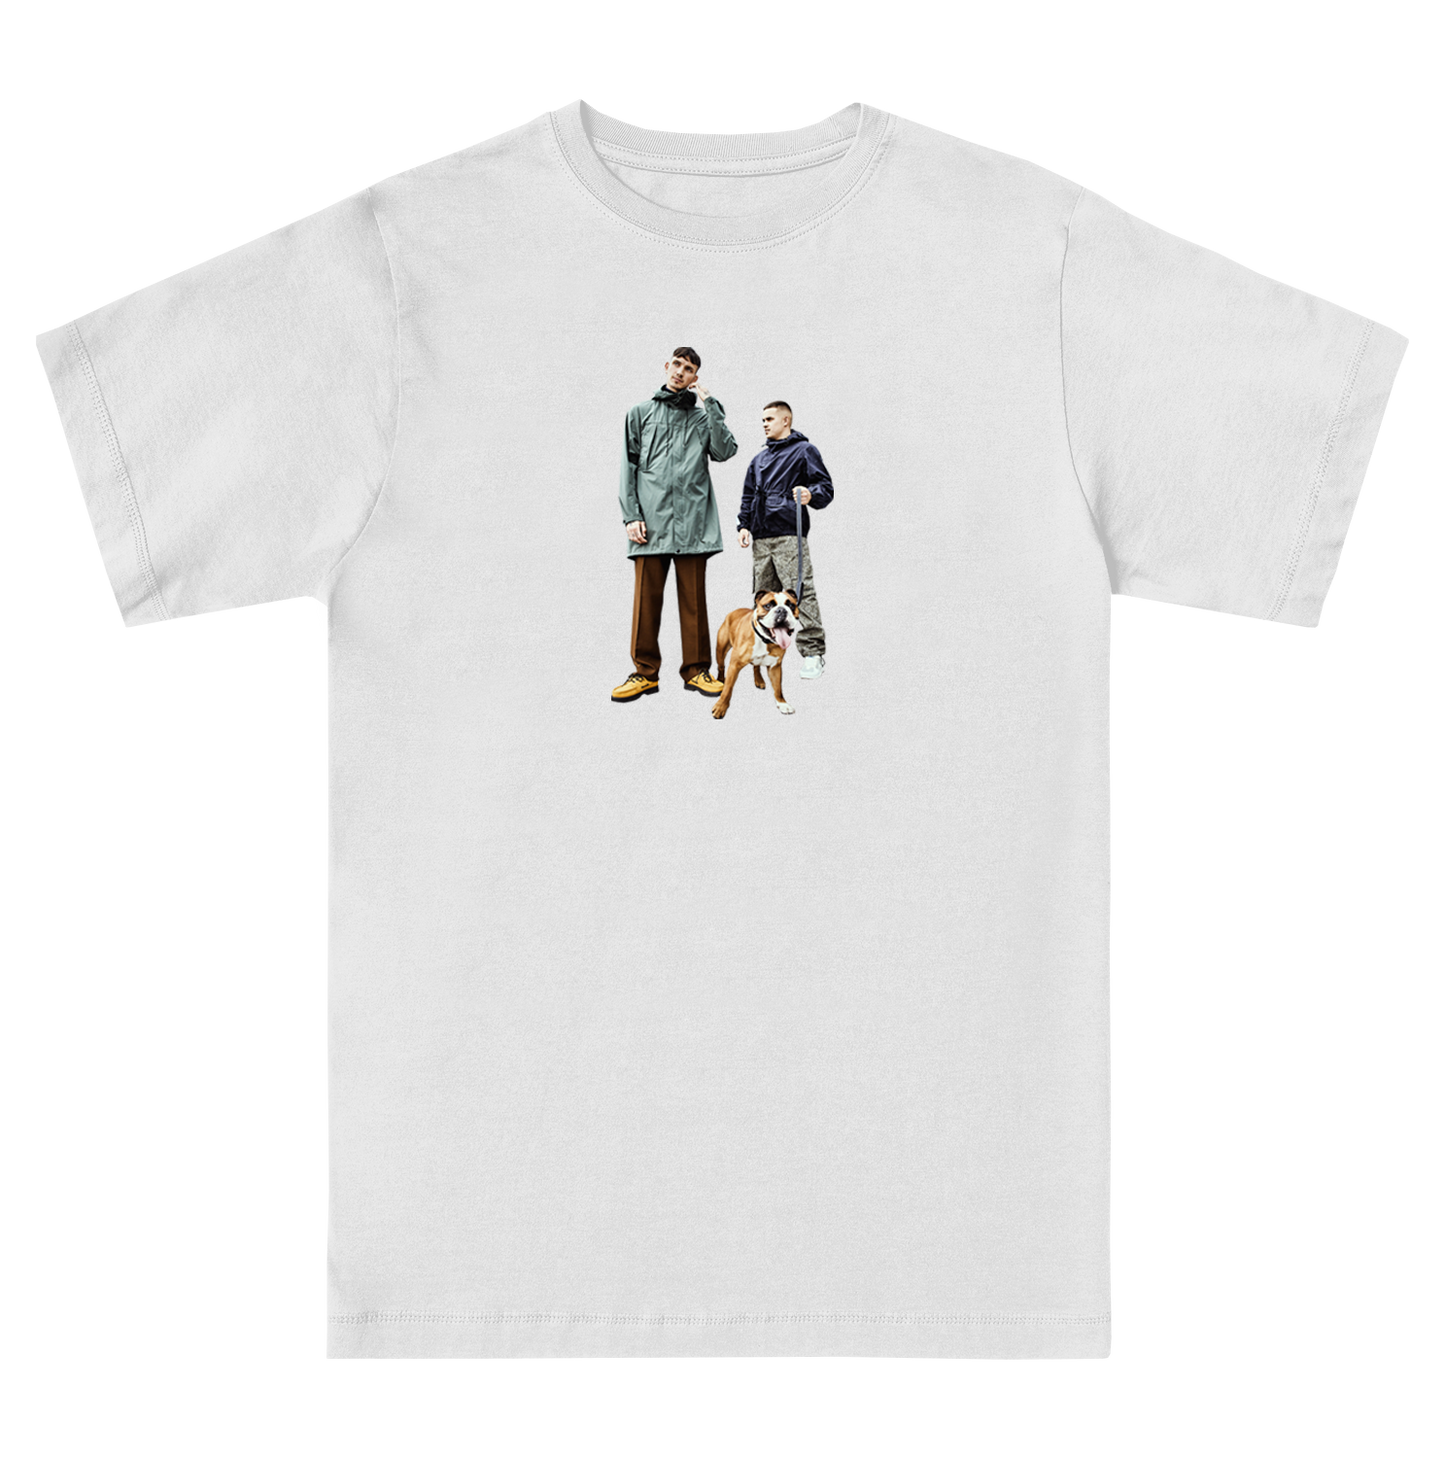 Just For The Times 2021 Tour Tee